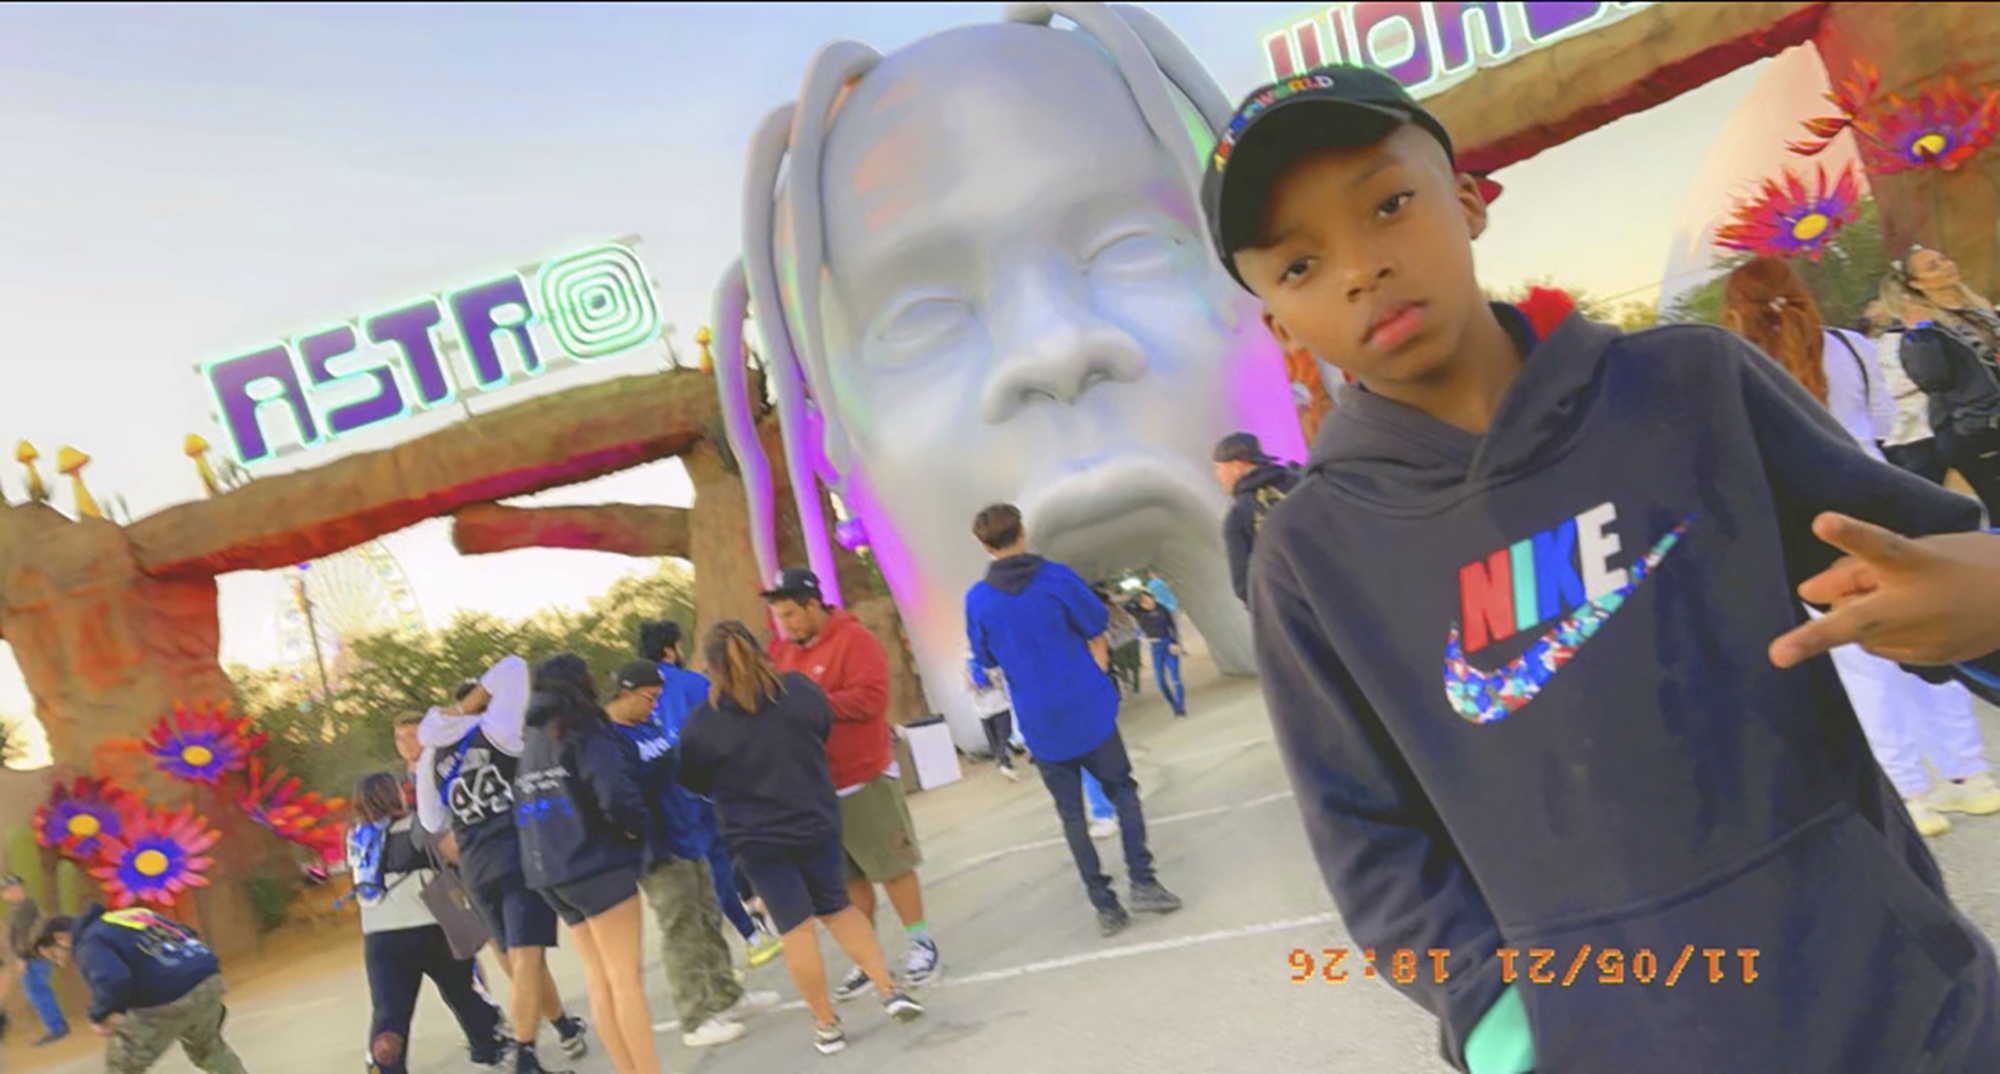 Family of 9-year-old Astroworld victim turns down rapper's offer